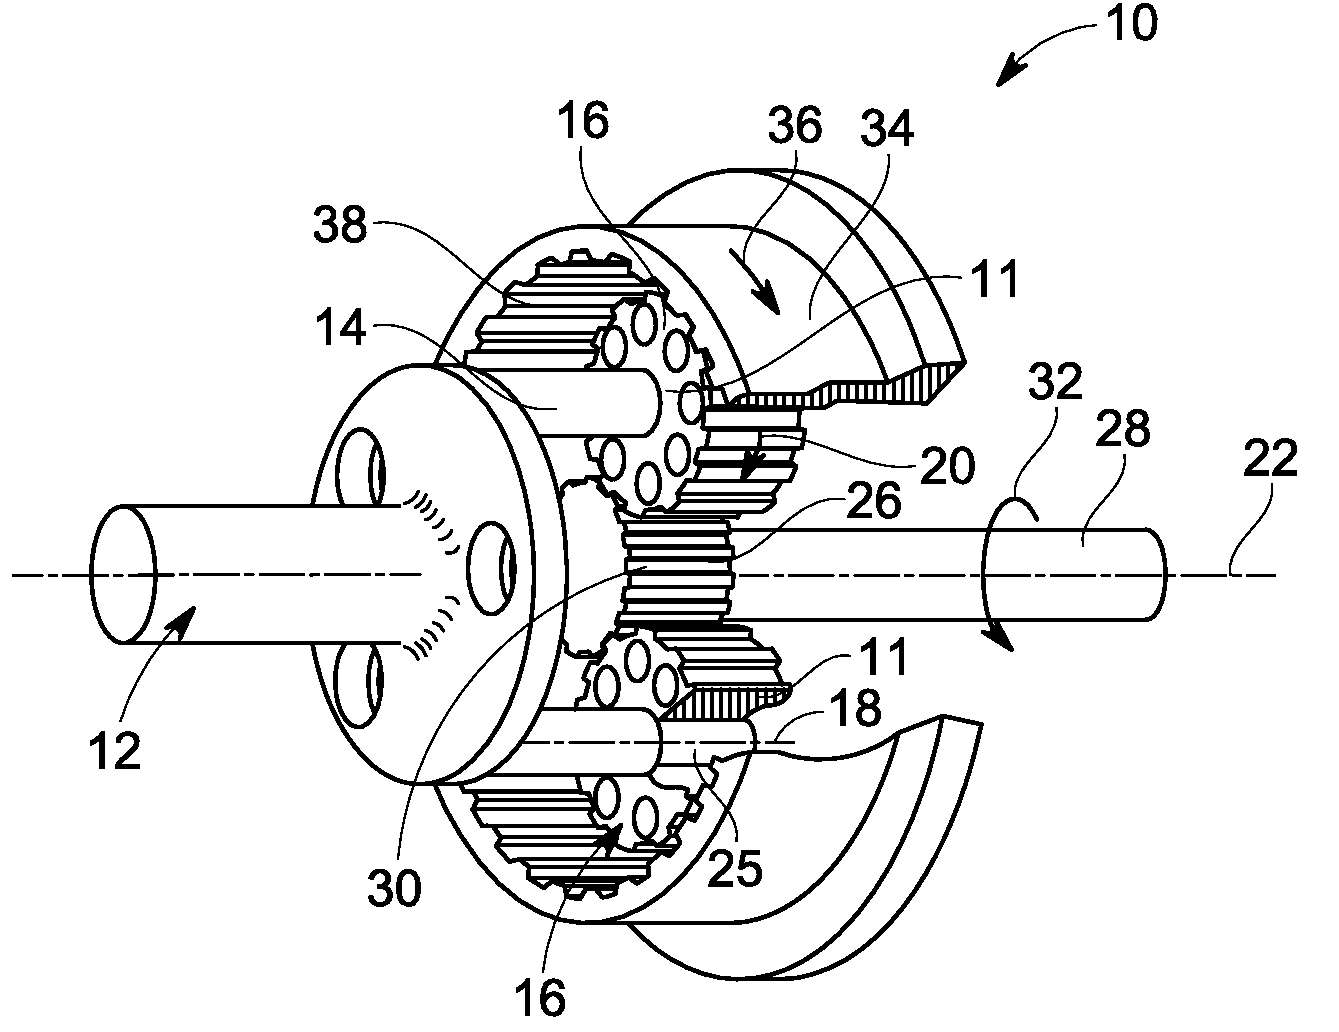 Journal bearing and method of facilitating hydrodynamic oil flow, load capacity and optimization of bearing performance